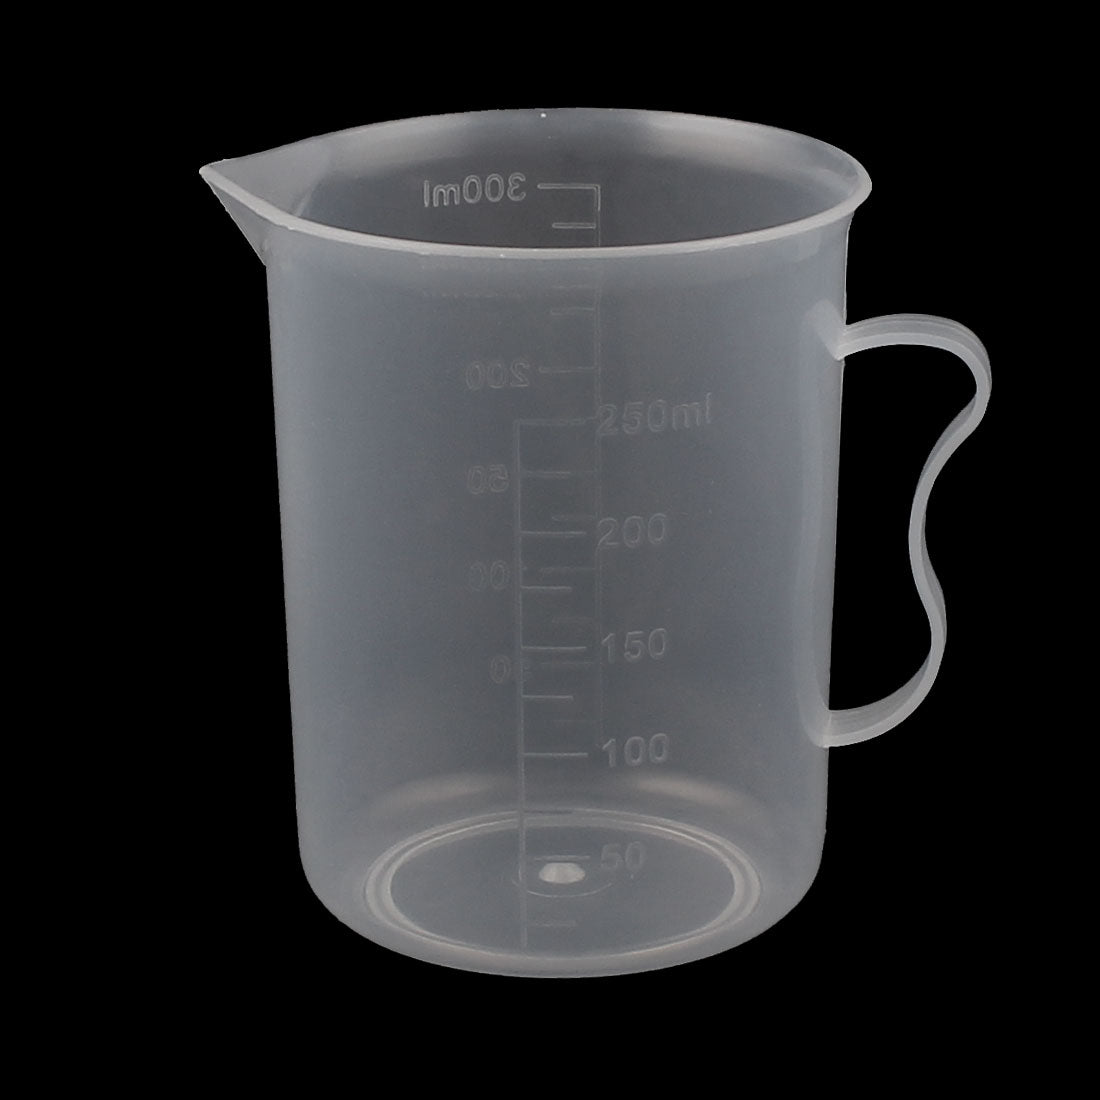 uxcell Uxcell 250ml Clear Plastic Measuring Cup With Handle Beaker Laboratory Set 3 Pcs